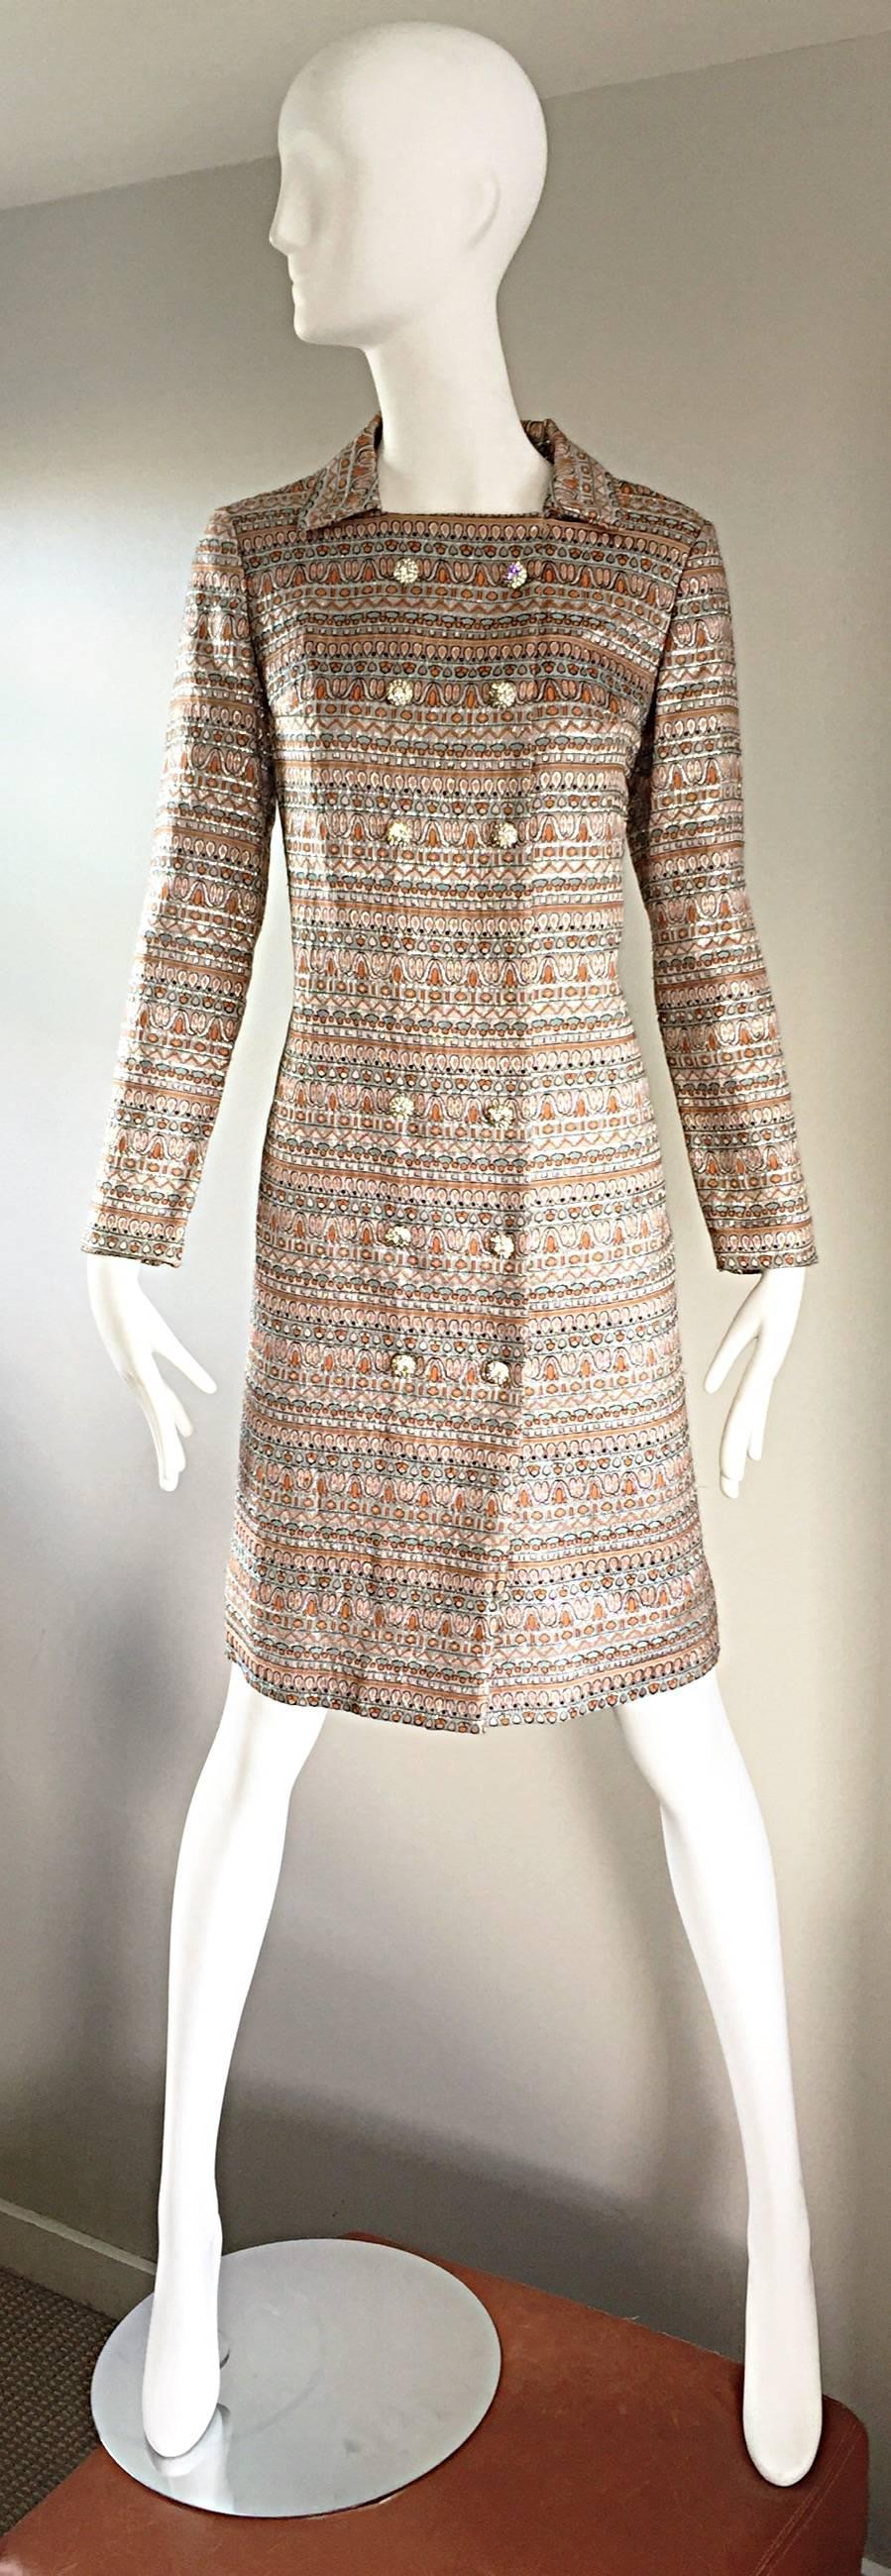 Beautiful 1960s Silk Brocade Amazing Rhinestone Back Mod 60s Couture Jacket Coat In Excellent Condition For Sale In San Diego, CA